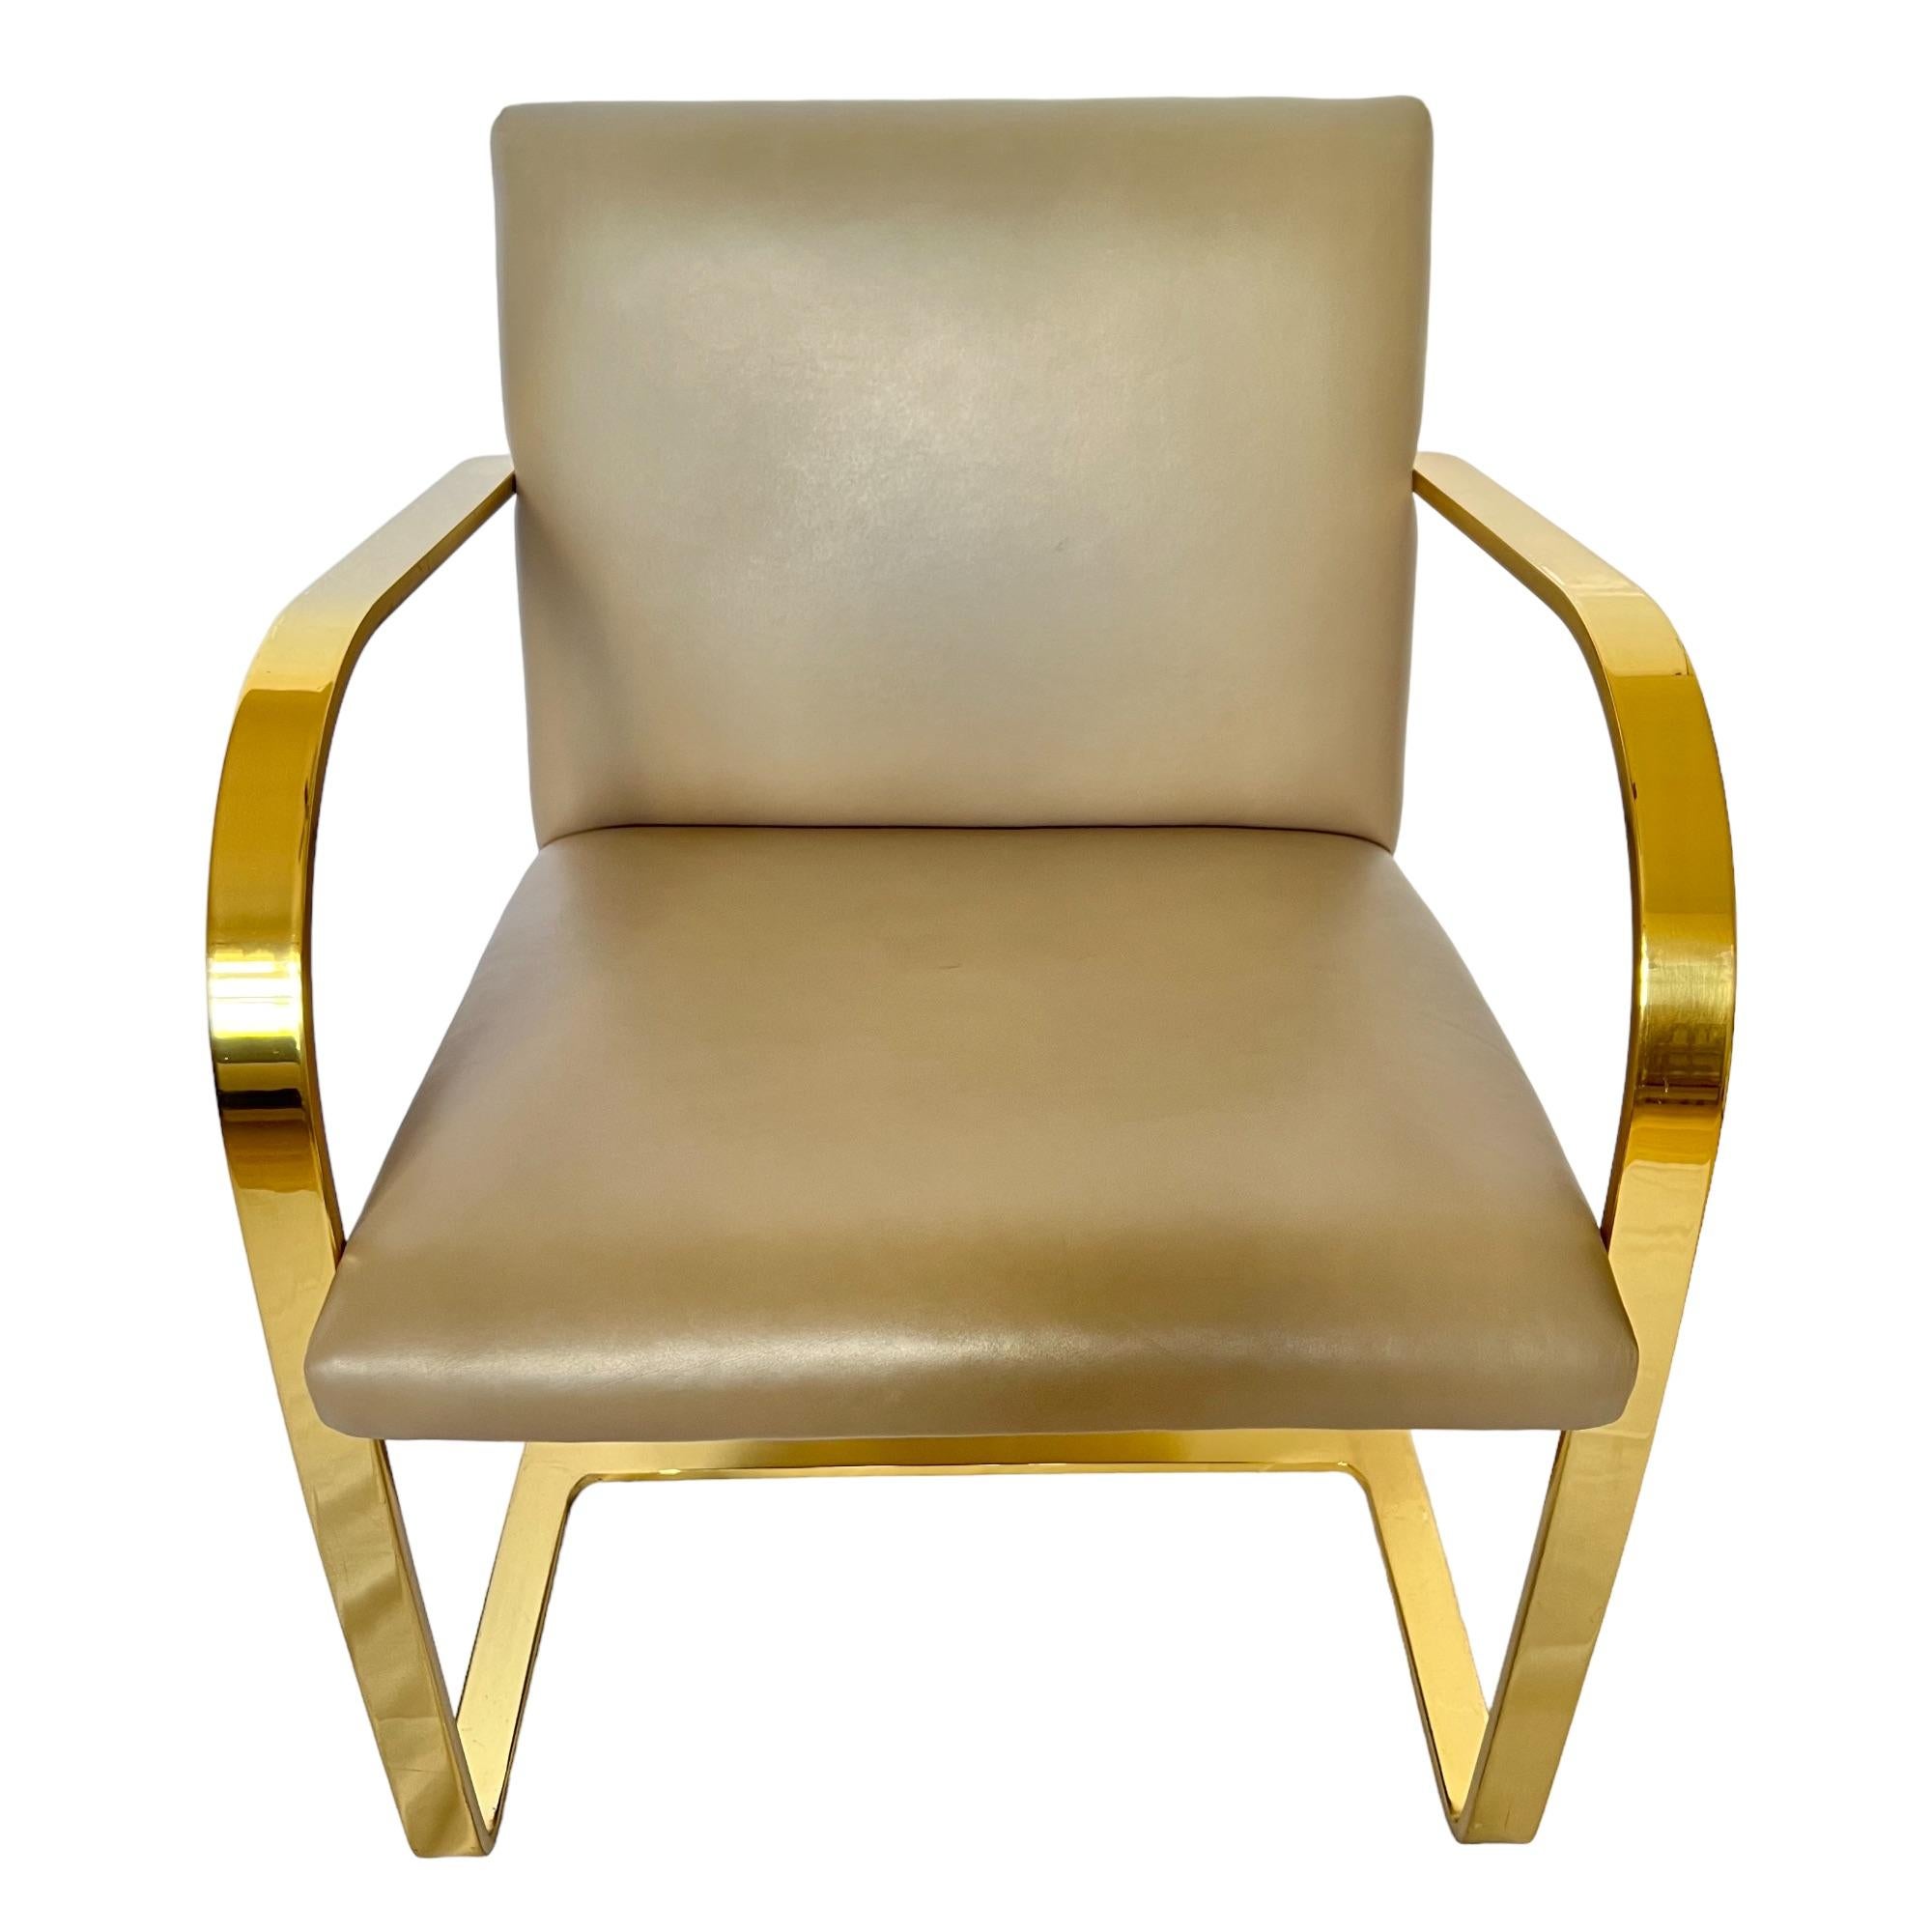 Late 20th Century Mies Van Der Rohe Brno Gold Brass Flat Bar Leather Chairs, a Pair